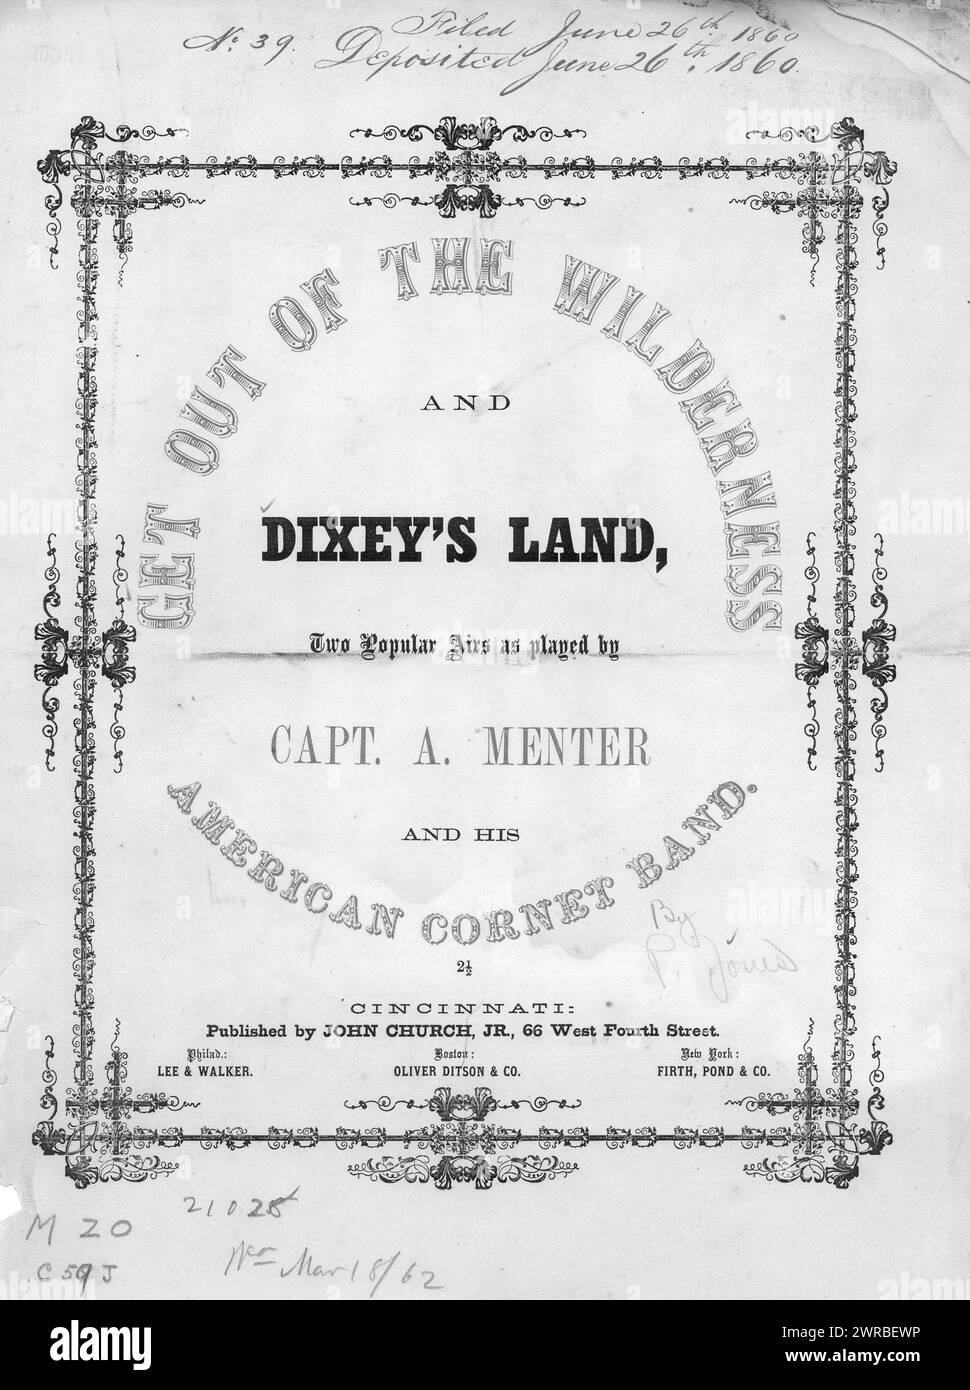 Get out of the wilderness and Dixey's land, Jones, Paul (arranger), John Church Jr., Cincinnati, 1860., United States, History, Civil War, 1861-1865, Songs and music Stock Photo